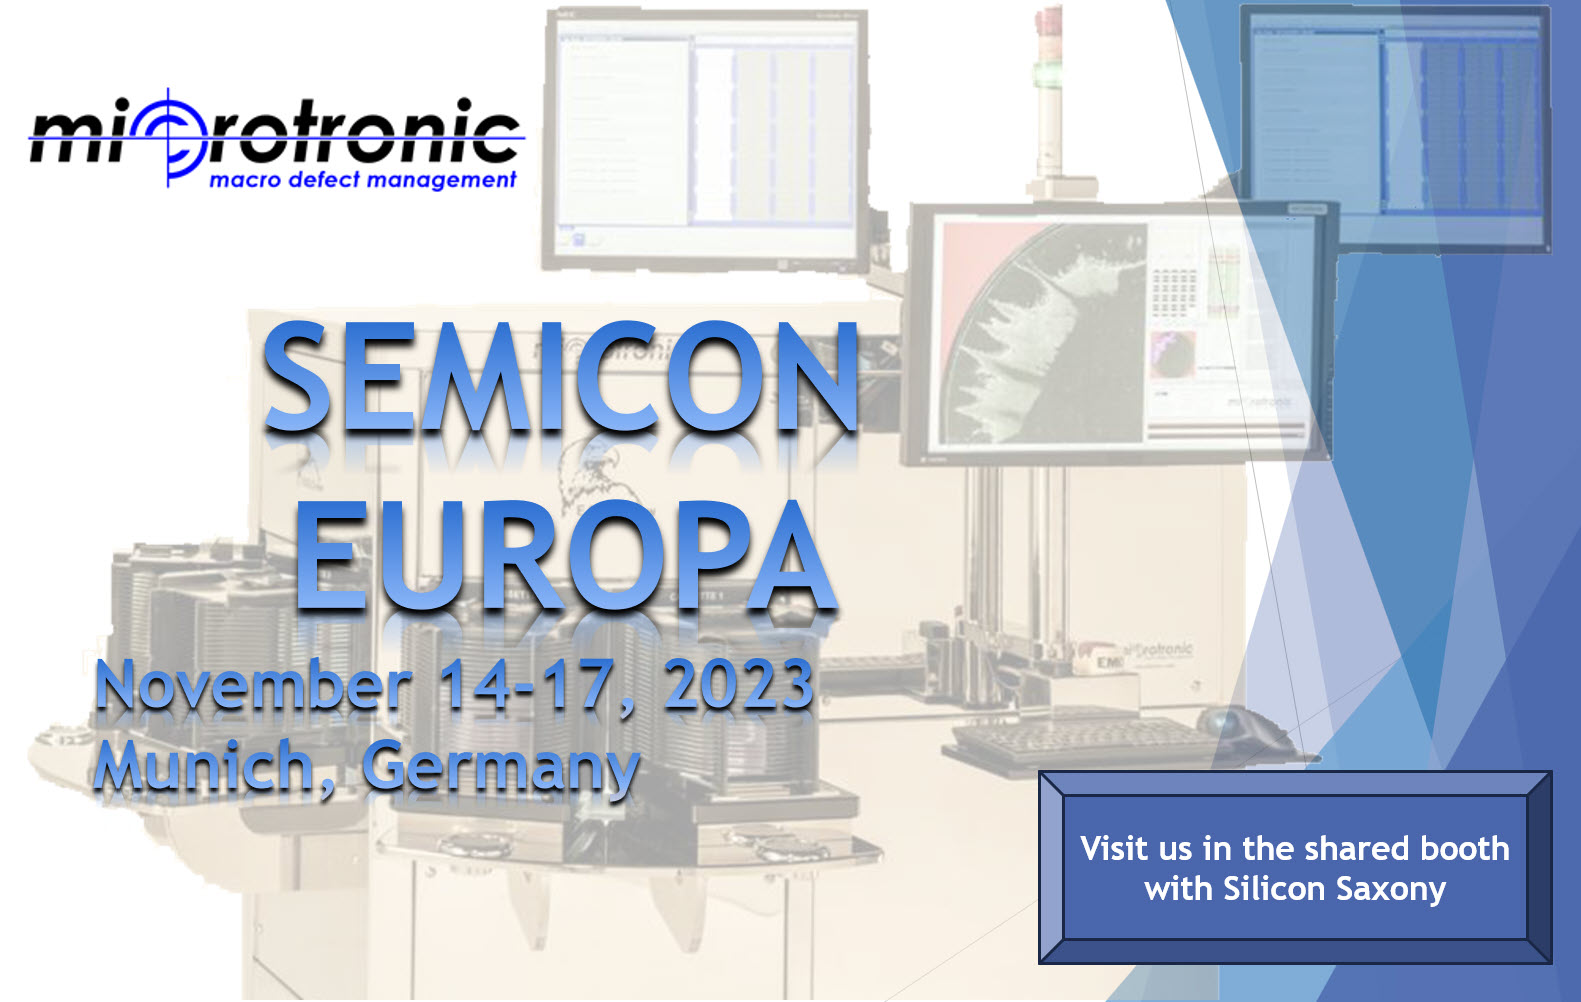 Connect with Microtronic at Semicon Europa